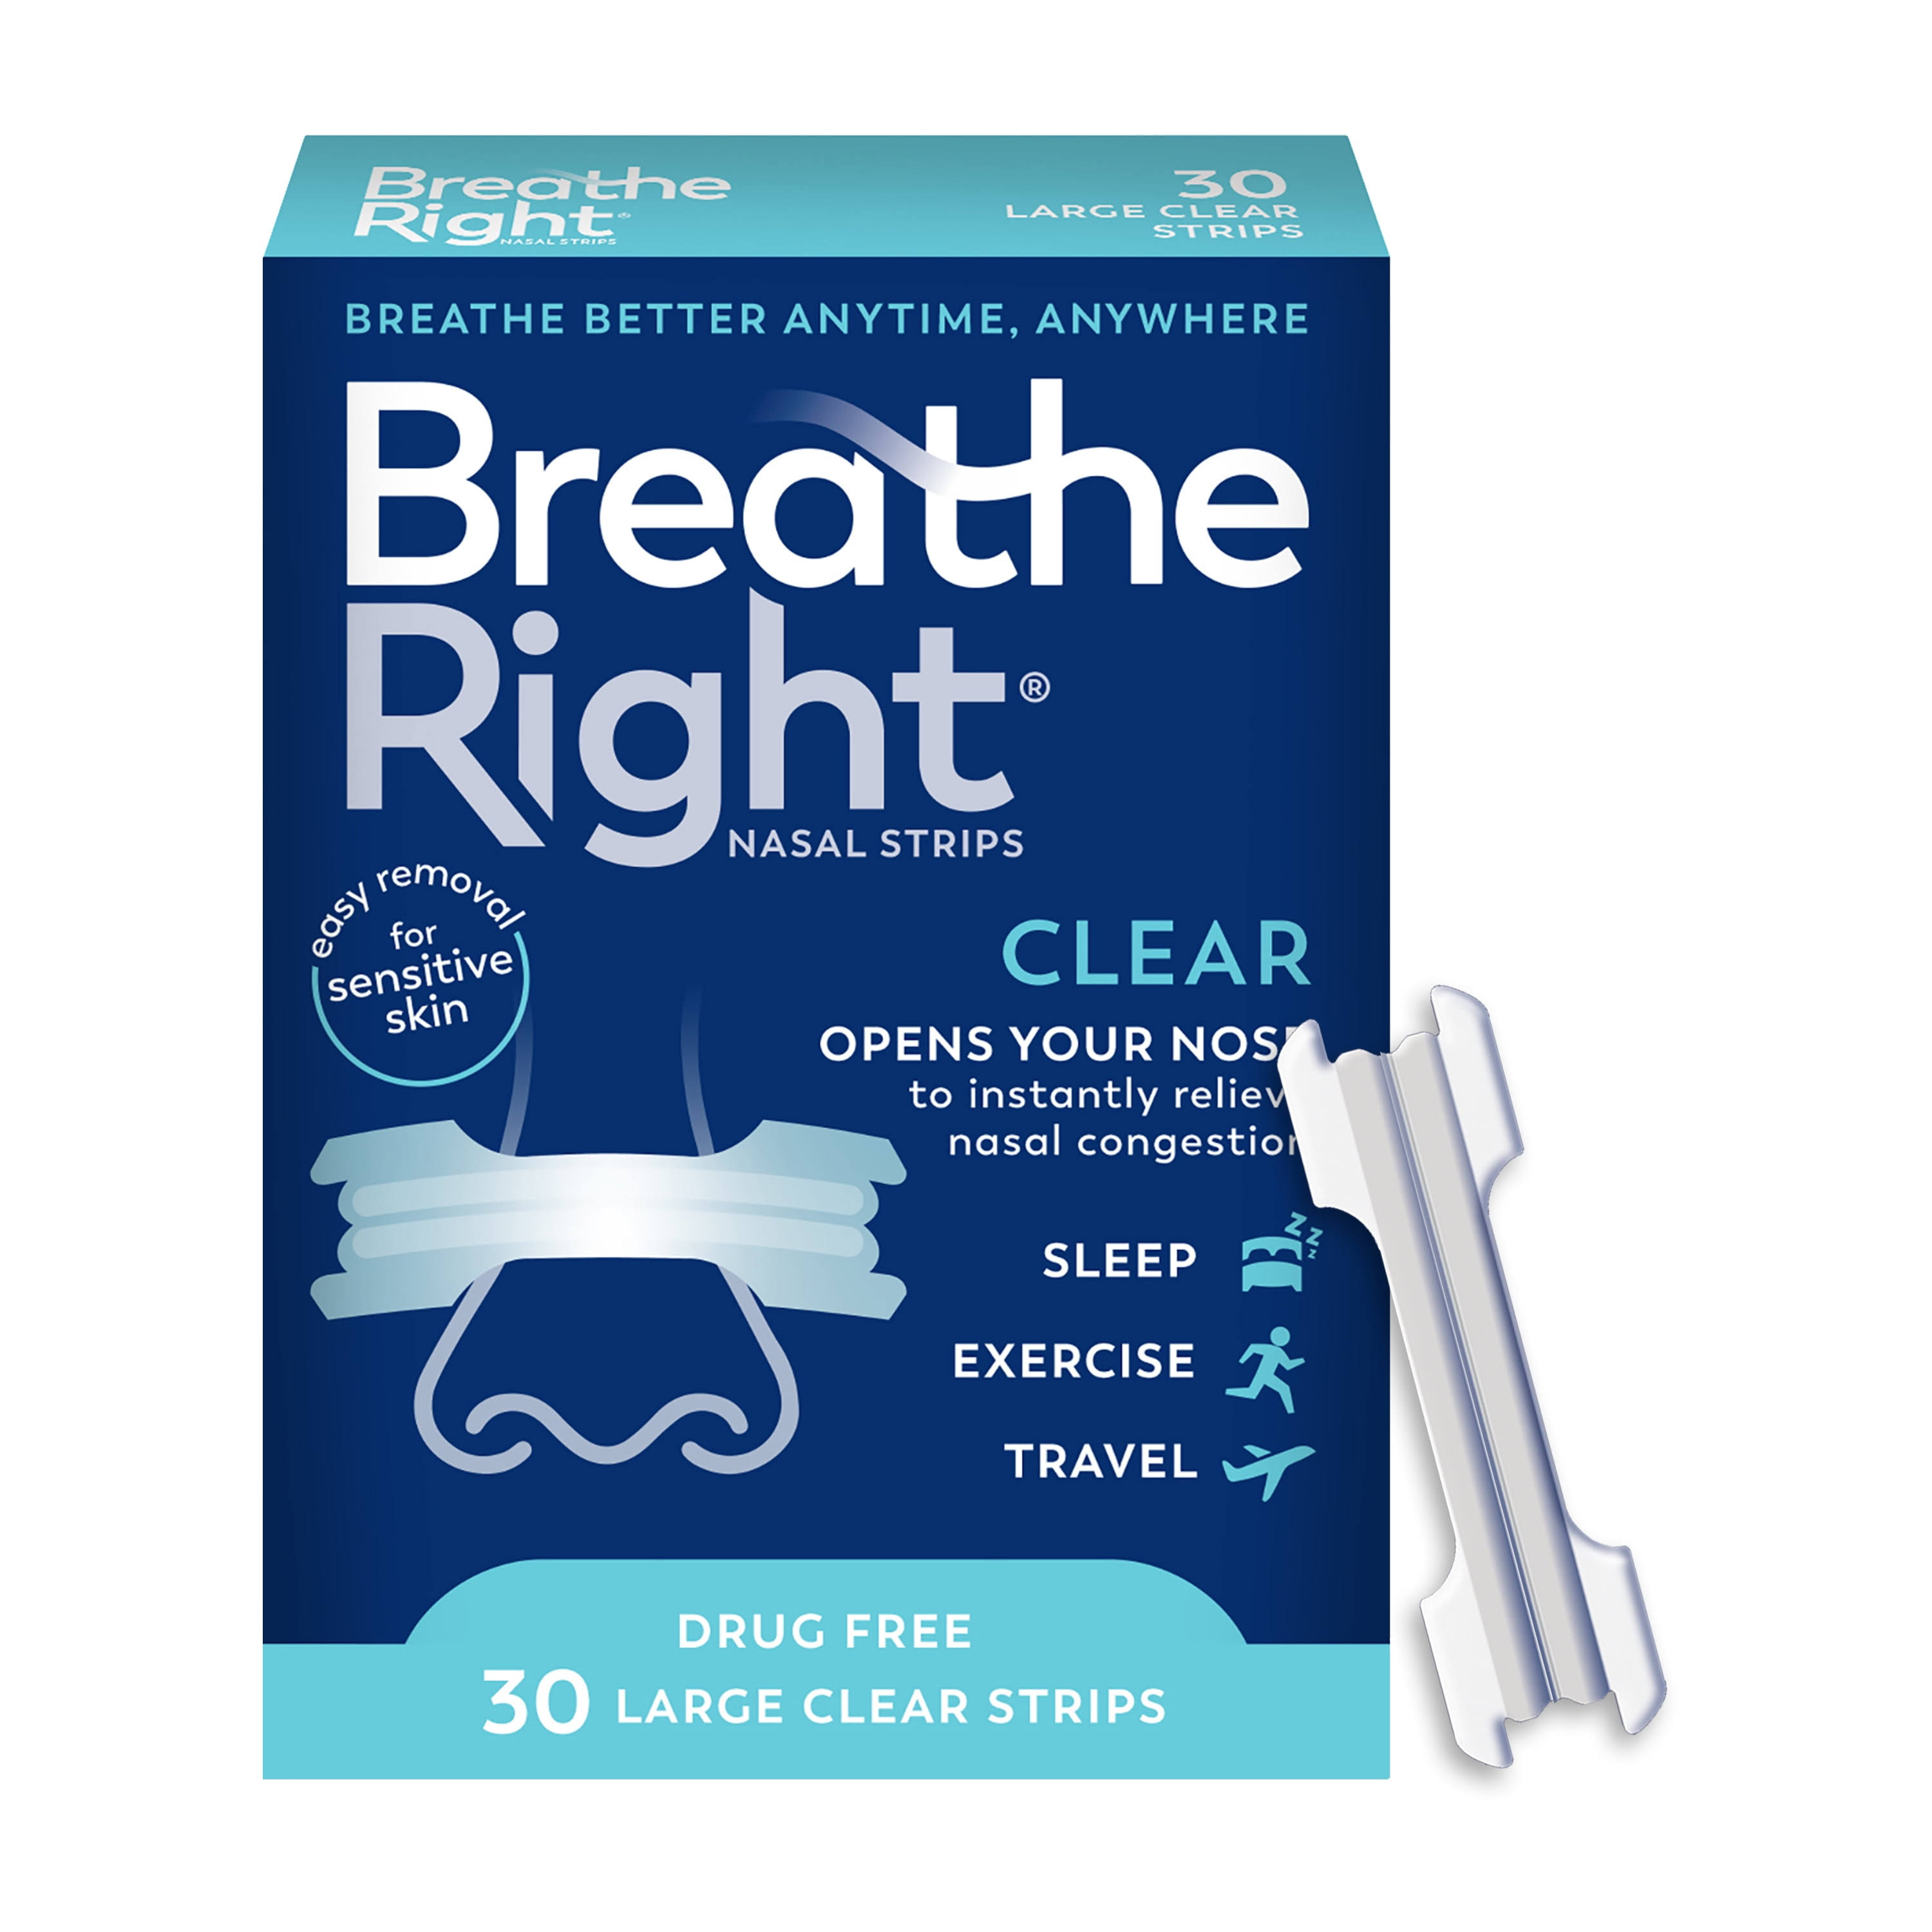 Breathe Right, Nasal Strips, Clear For Sensitive Skin, Large, 30 Clear Strips